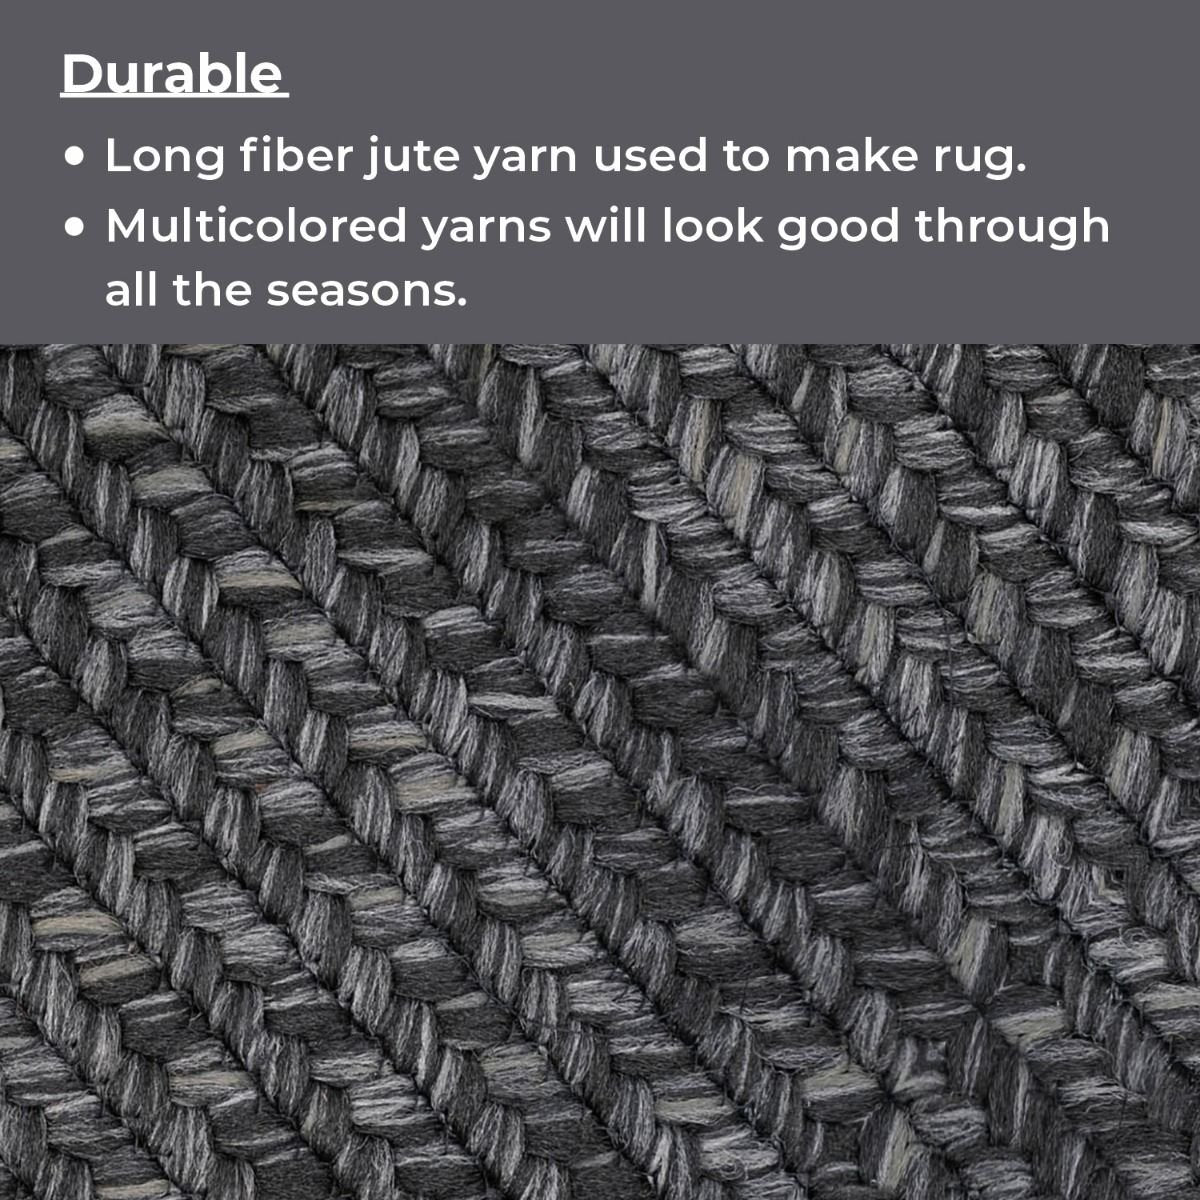 Black Outdoor Braided Oval Rugs - Braided-Rugs.com